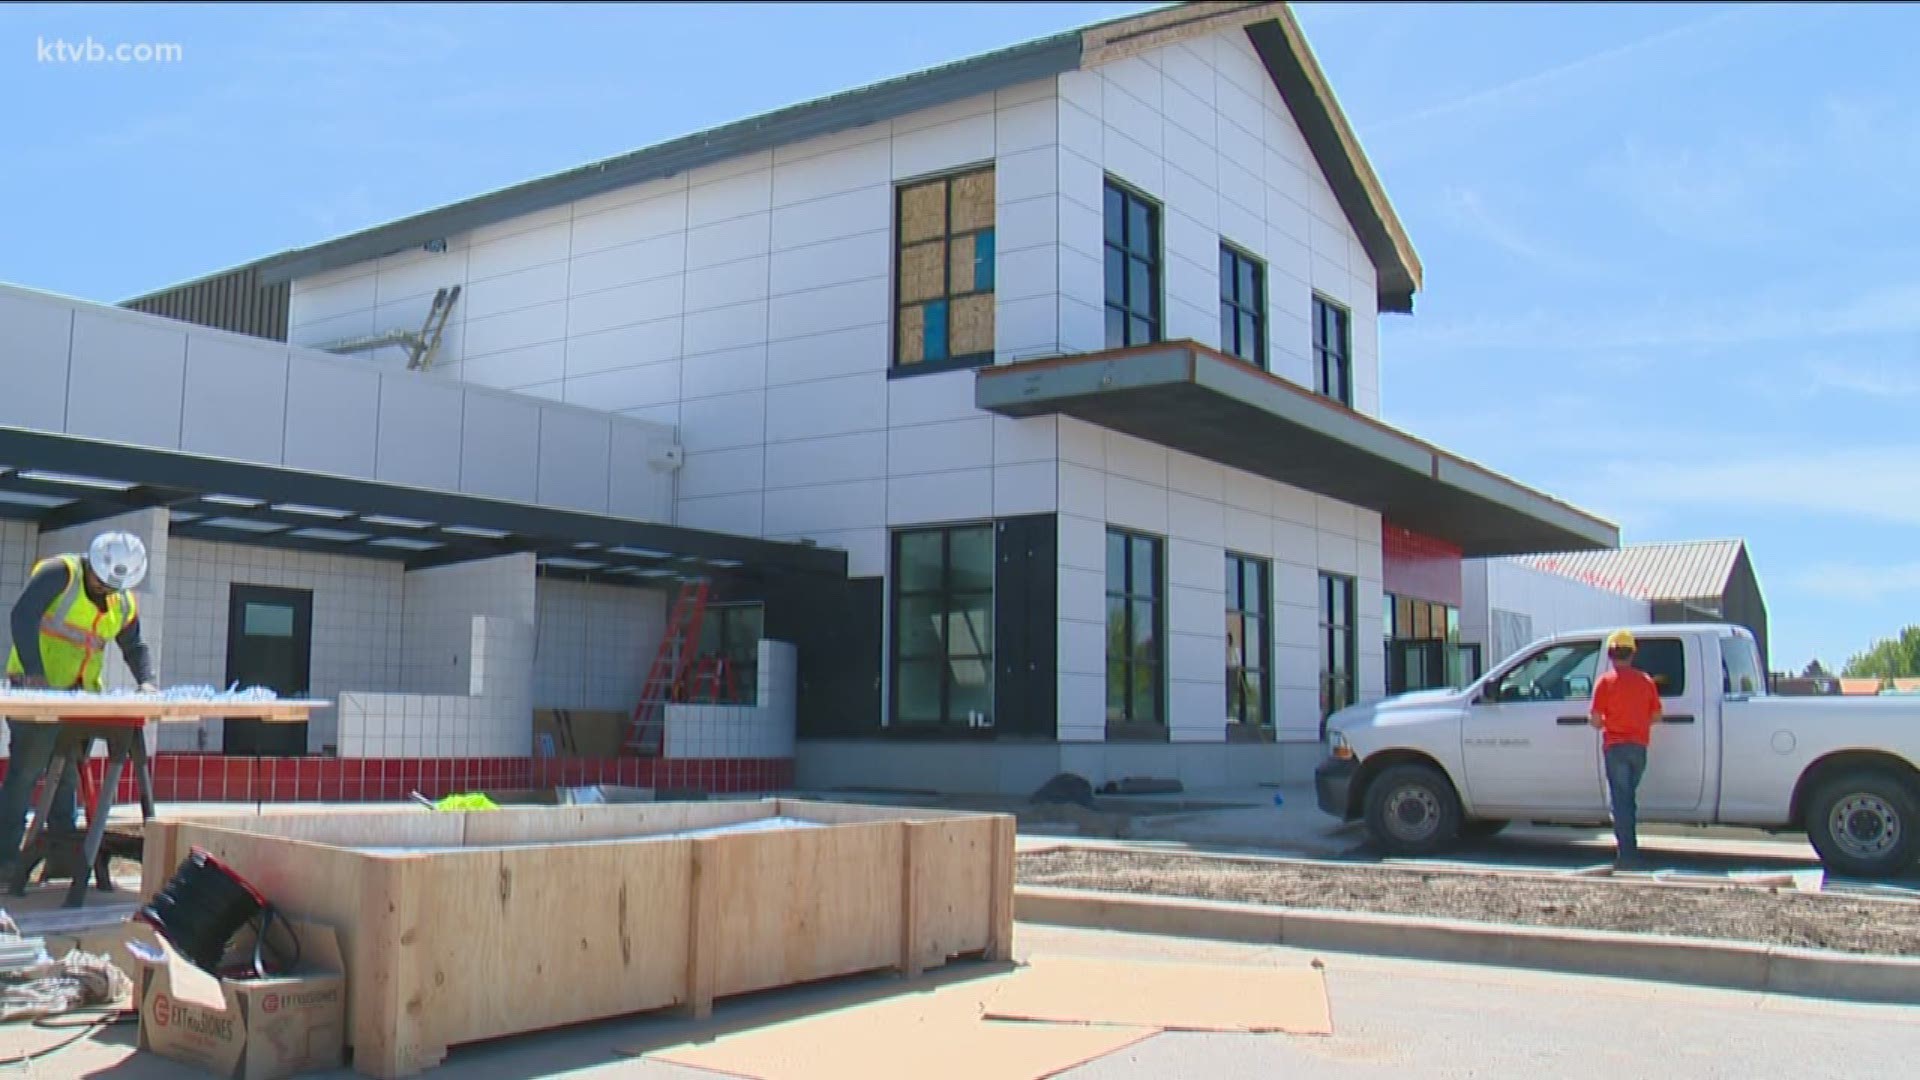 The Idaho Humane Society received a donation of $105,000 during Idaho Gives that will go towards their new shelter.